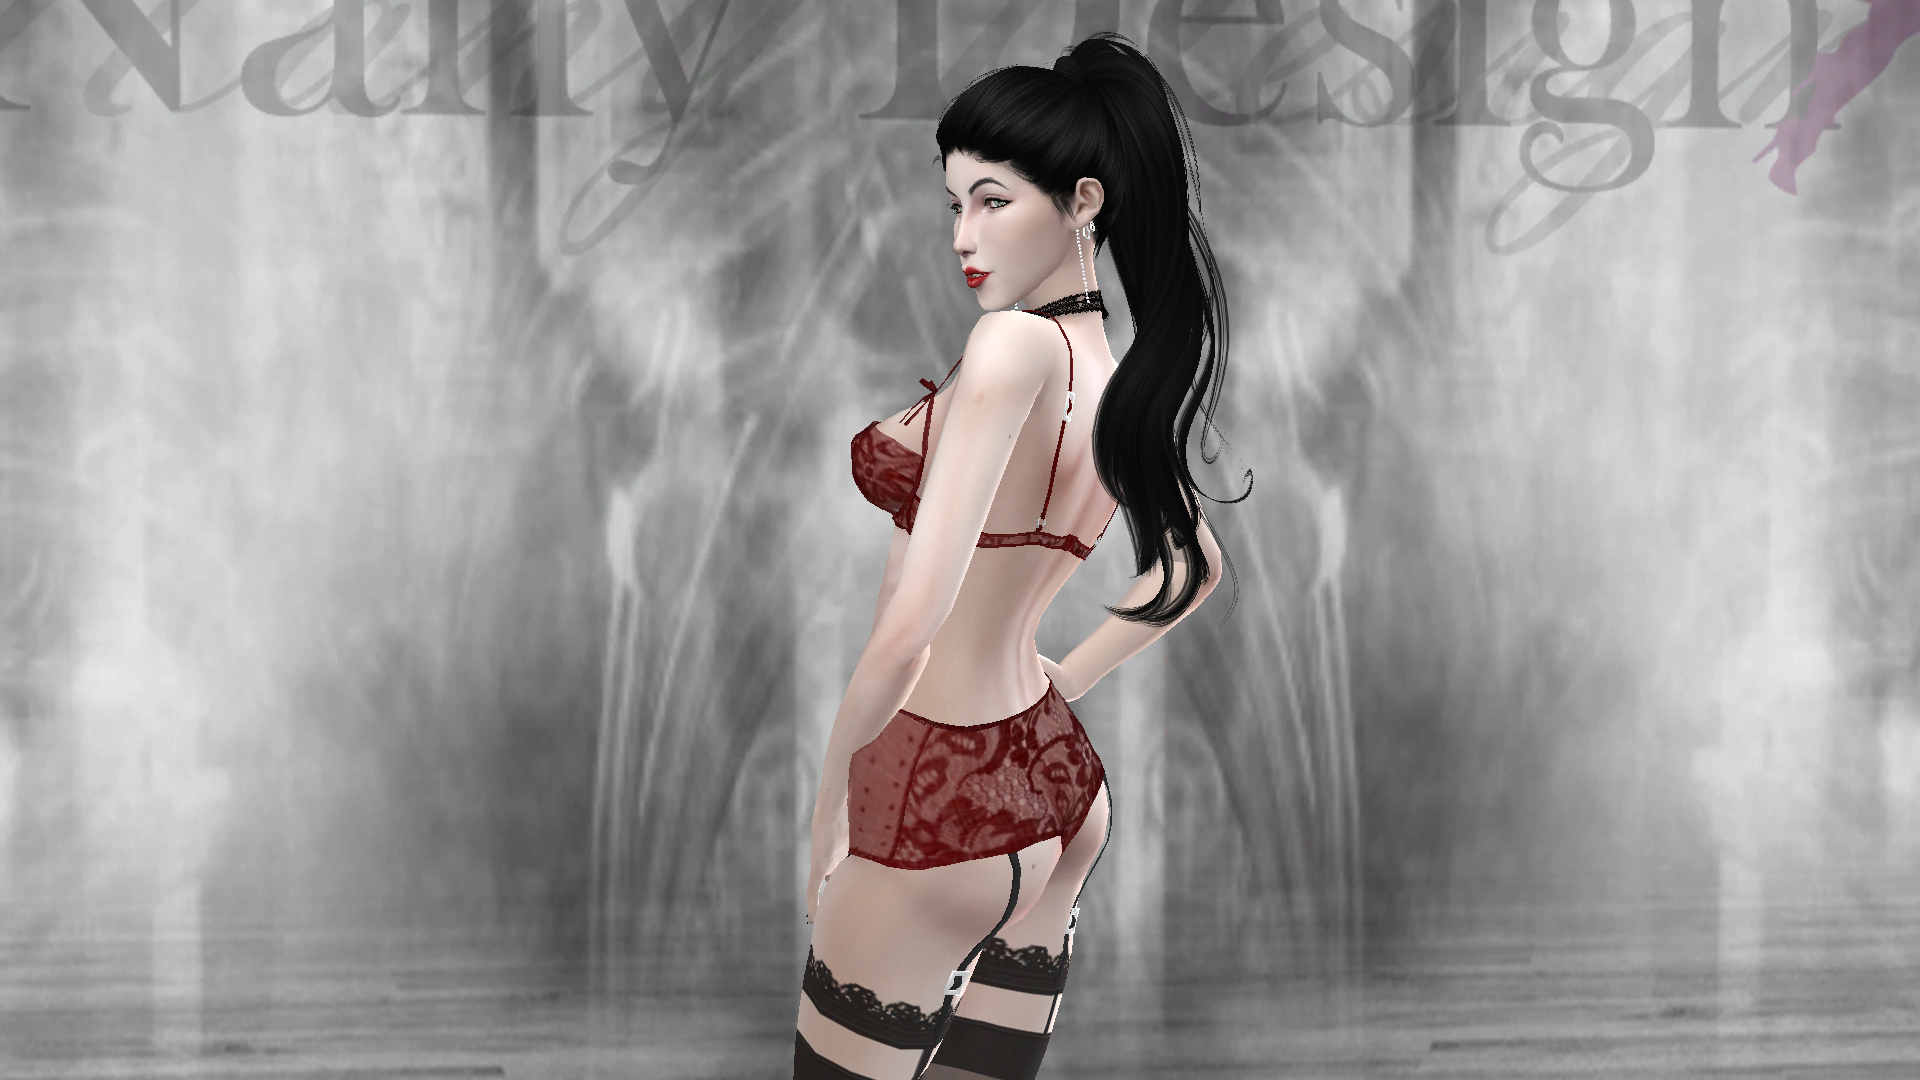 Sexy Lingerie Request And Find The Sims 4 Loverslab